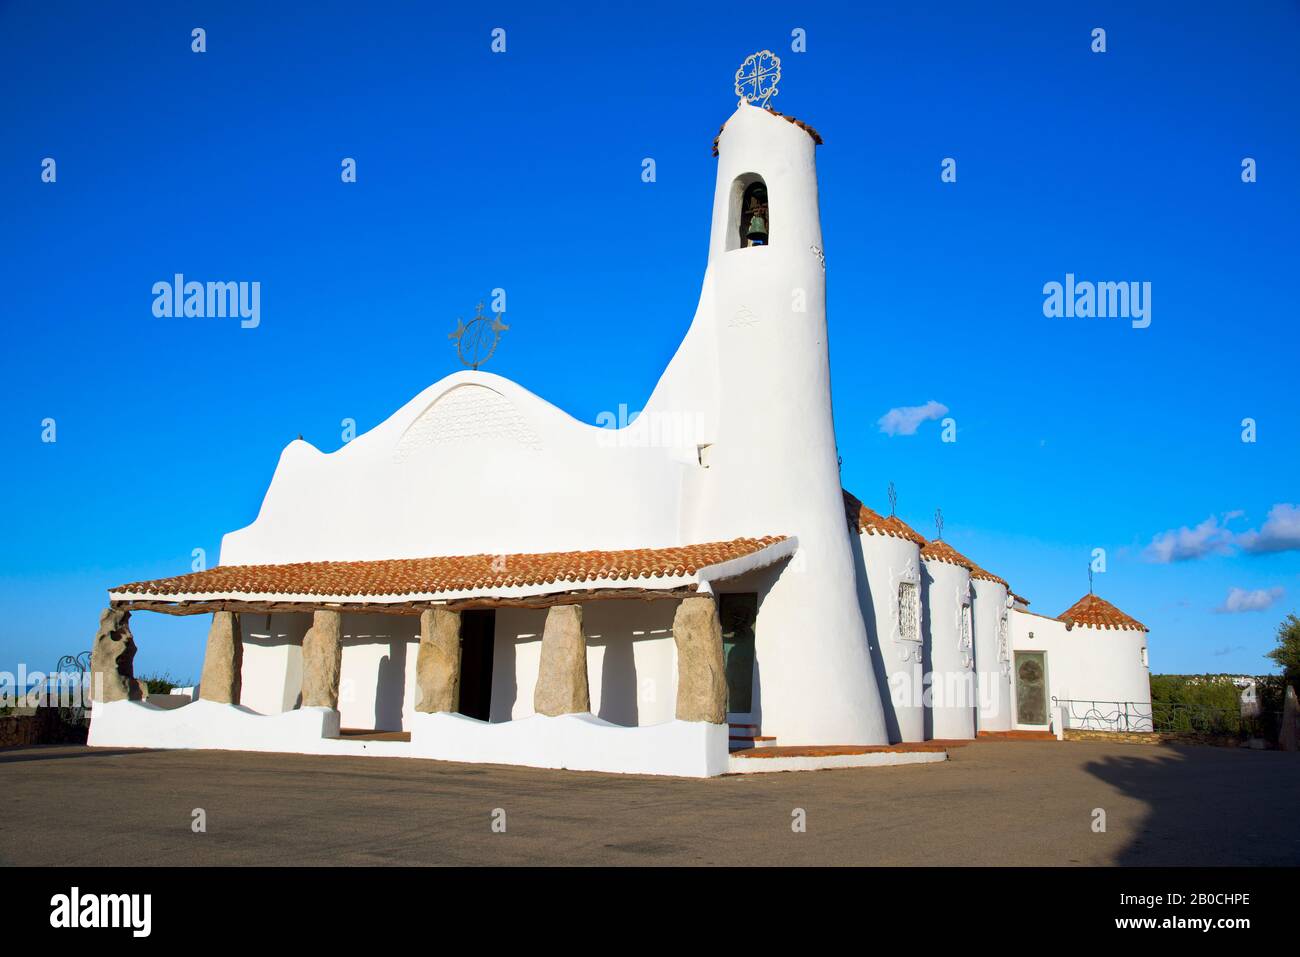 PORTO CERVO, ITALY - SEPTEMBER 21, 2017: A view of the Stella Maris Church in Porto Cervo, in Sardinia, Italy, built in the 1960s by the architect Mic Stock Photo